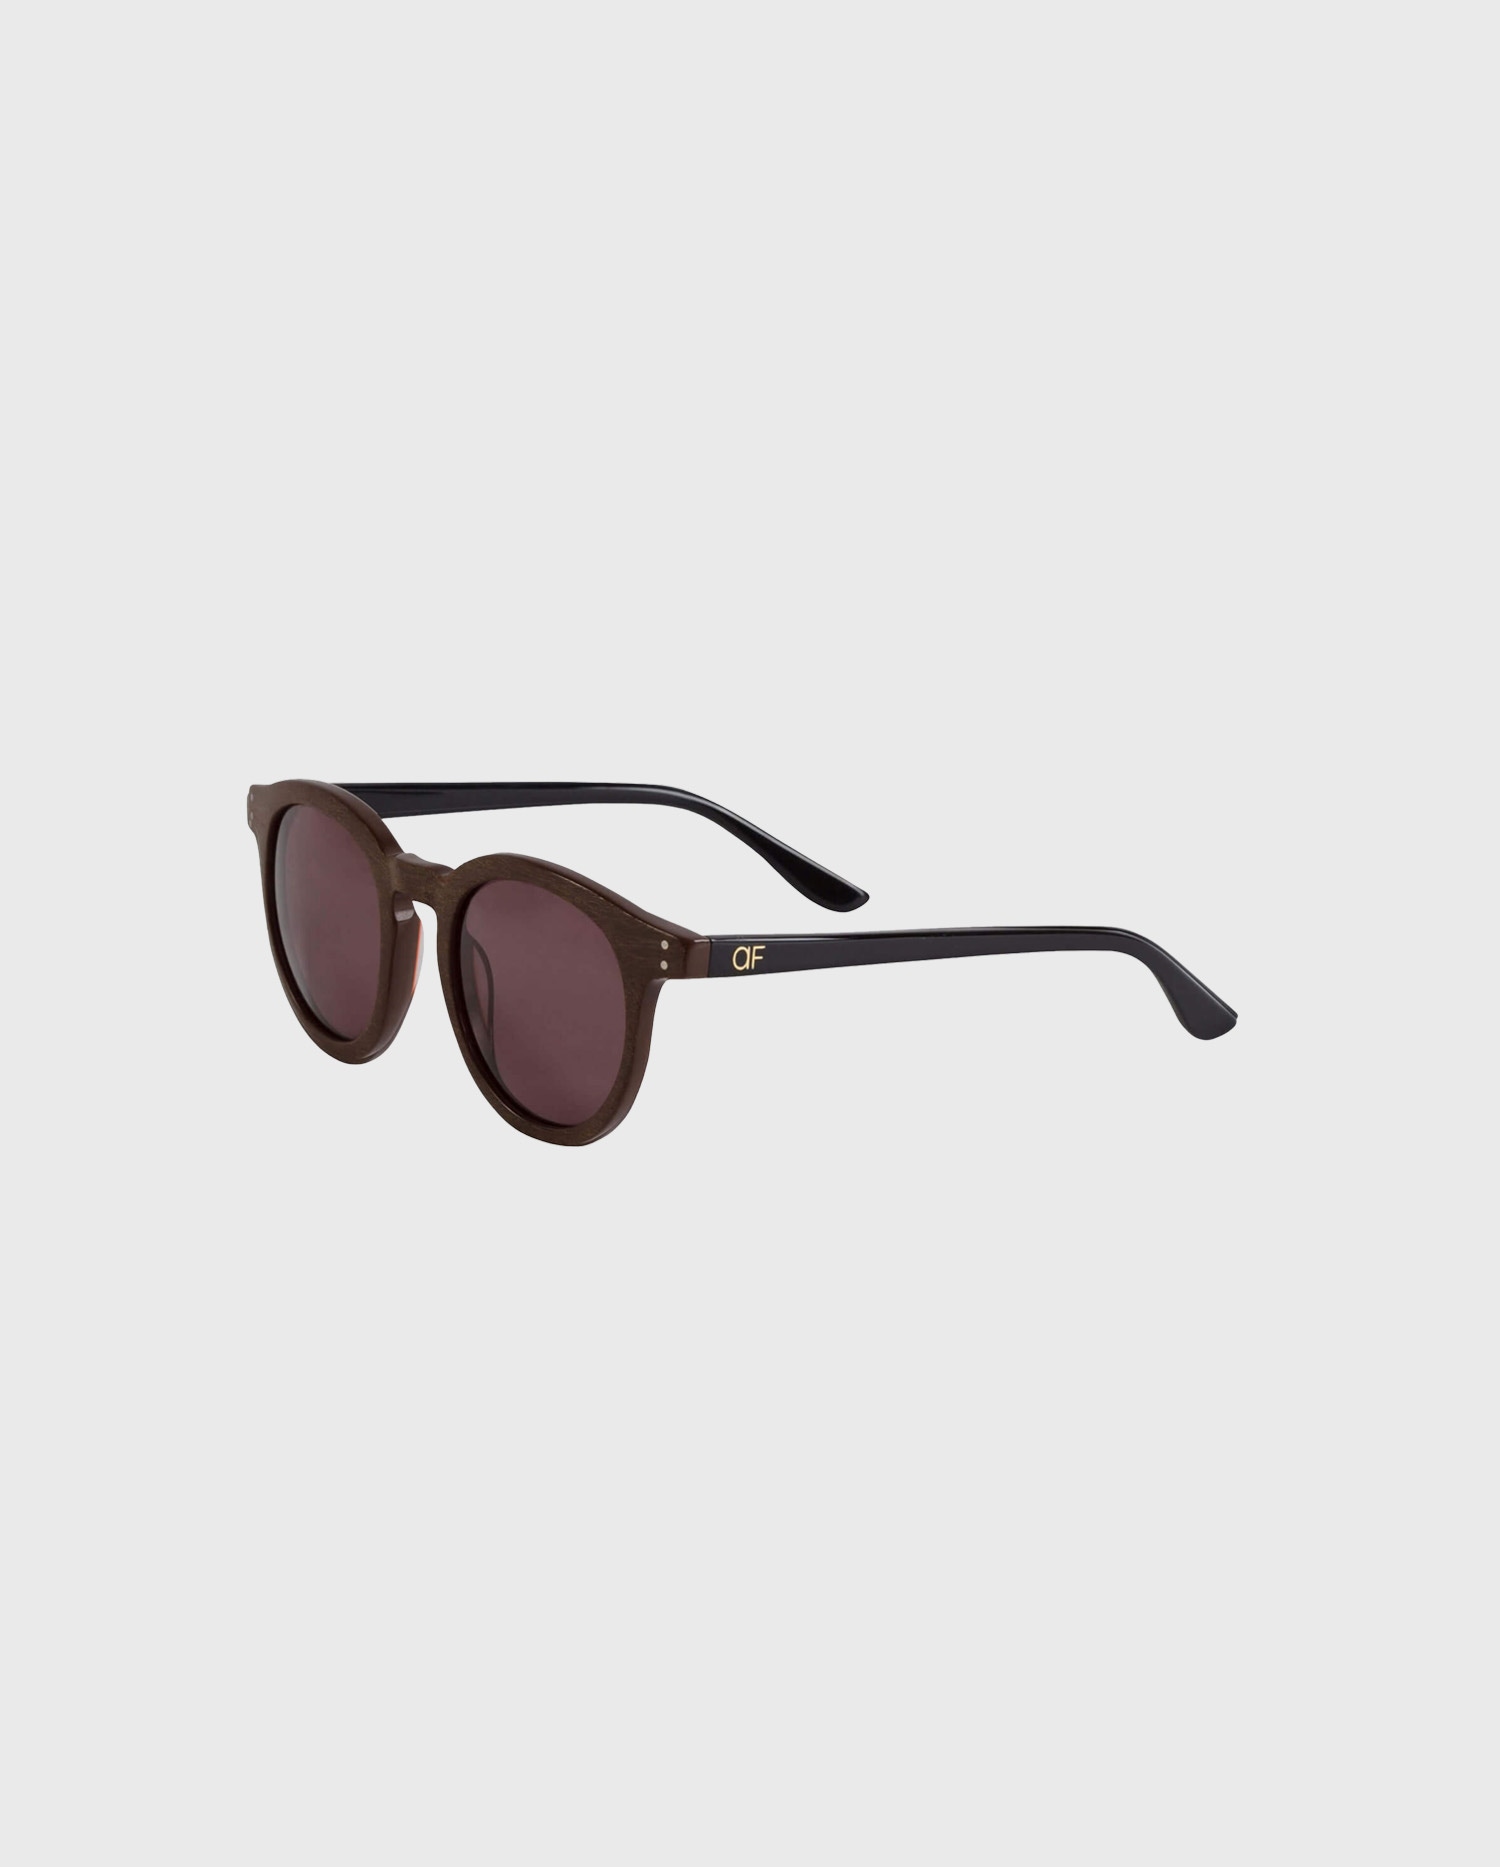   The VOOD Wood-style signature sunglasses are the perfect addition to your essential wardrobe